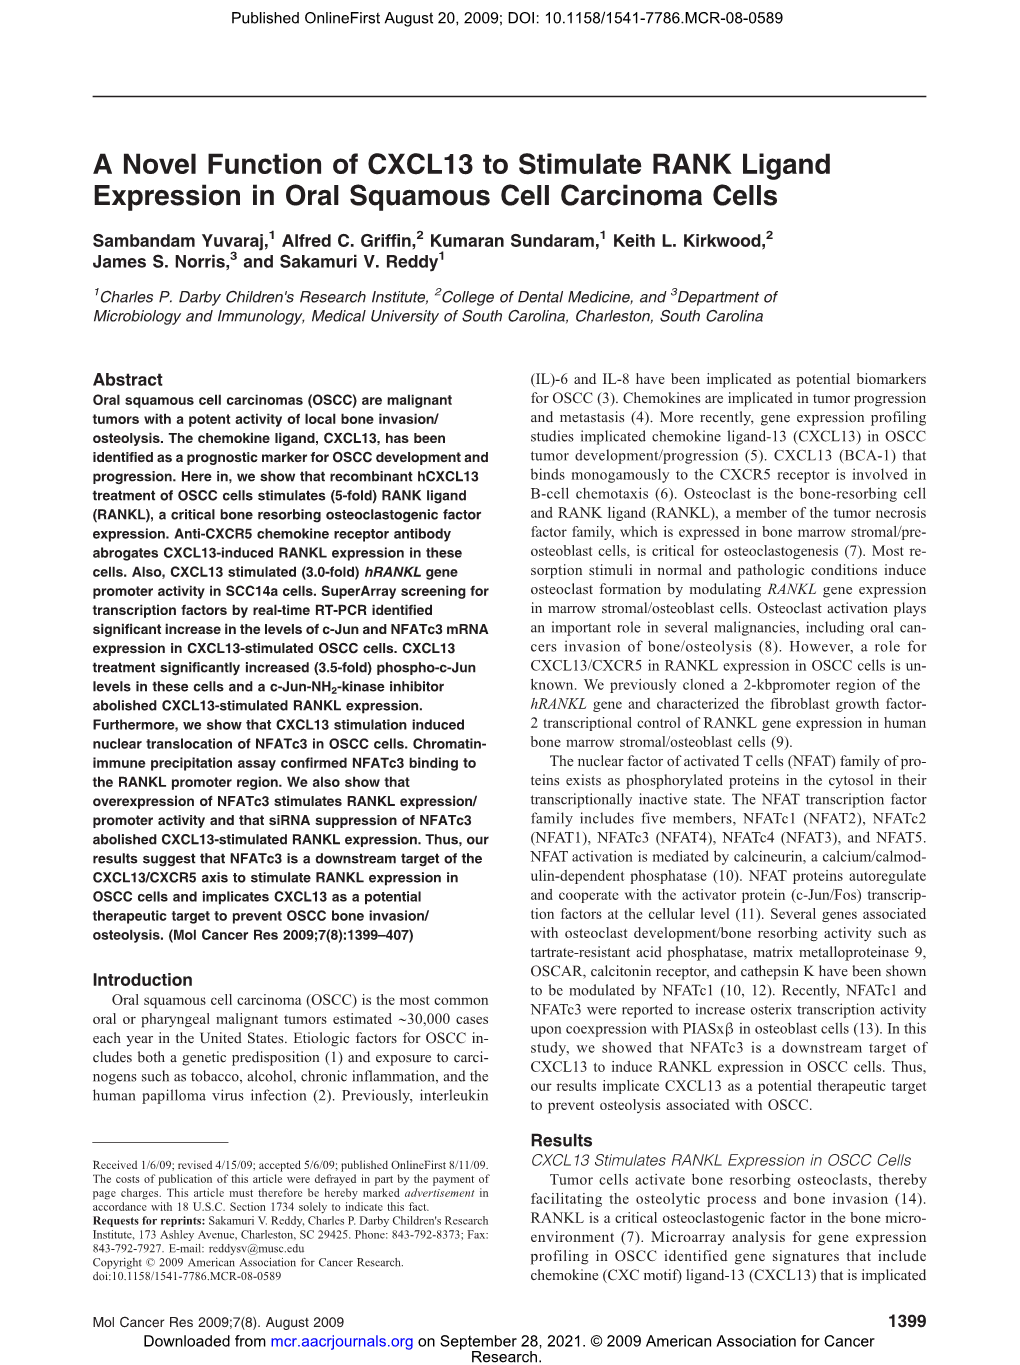 A Novel Function of CXCL13 to Stimulate RANK Ligand Expression in Oral Squamous Cell Carcinoma Cells